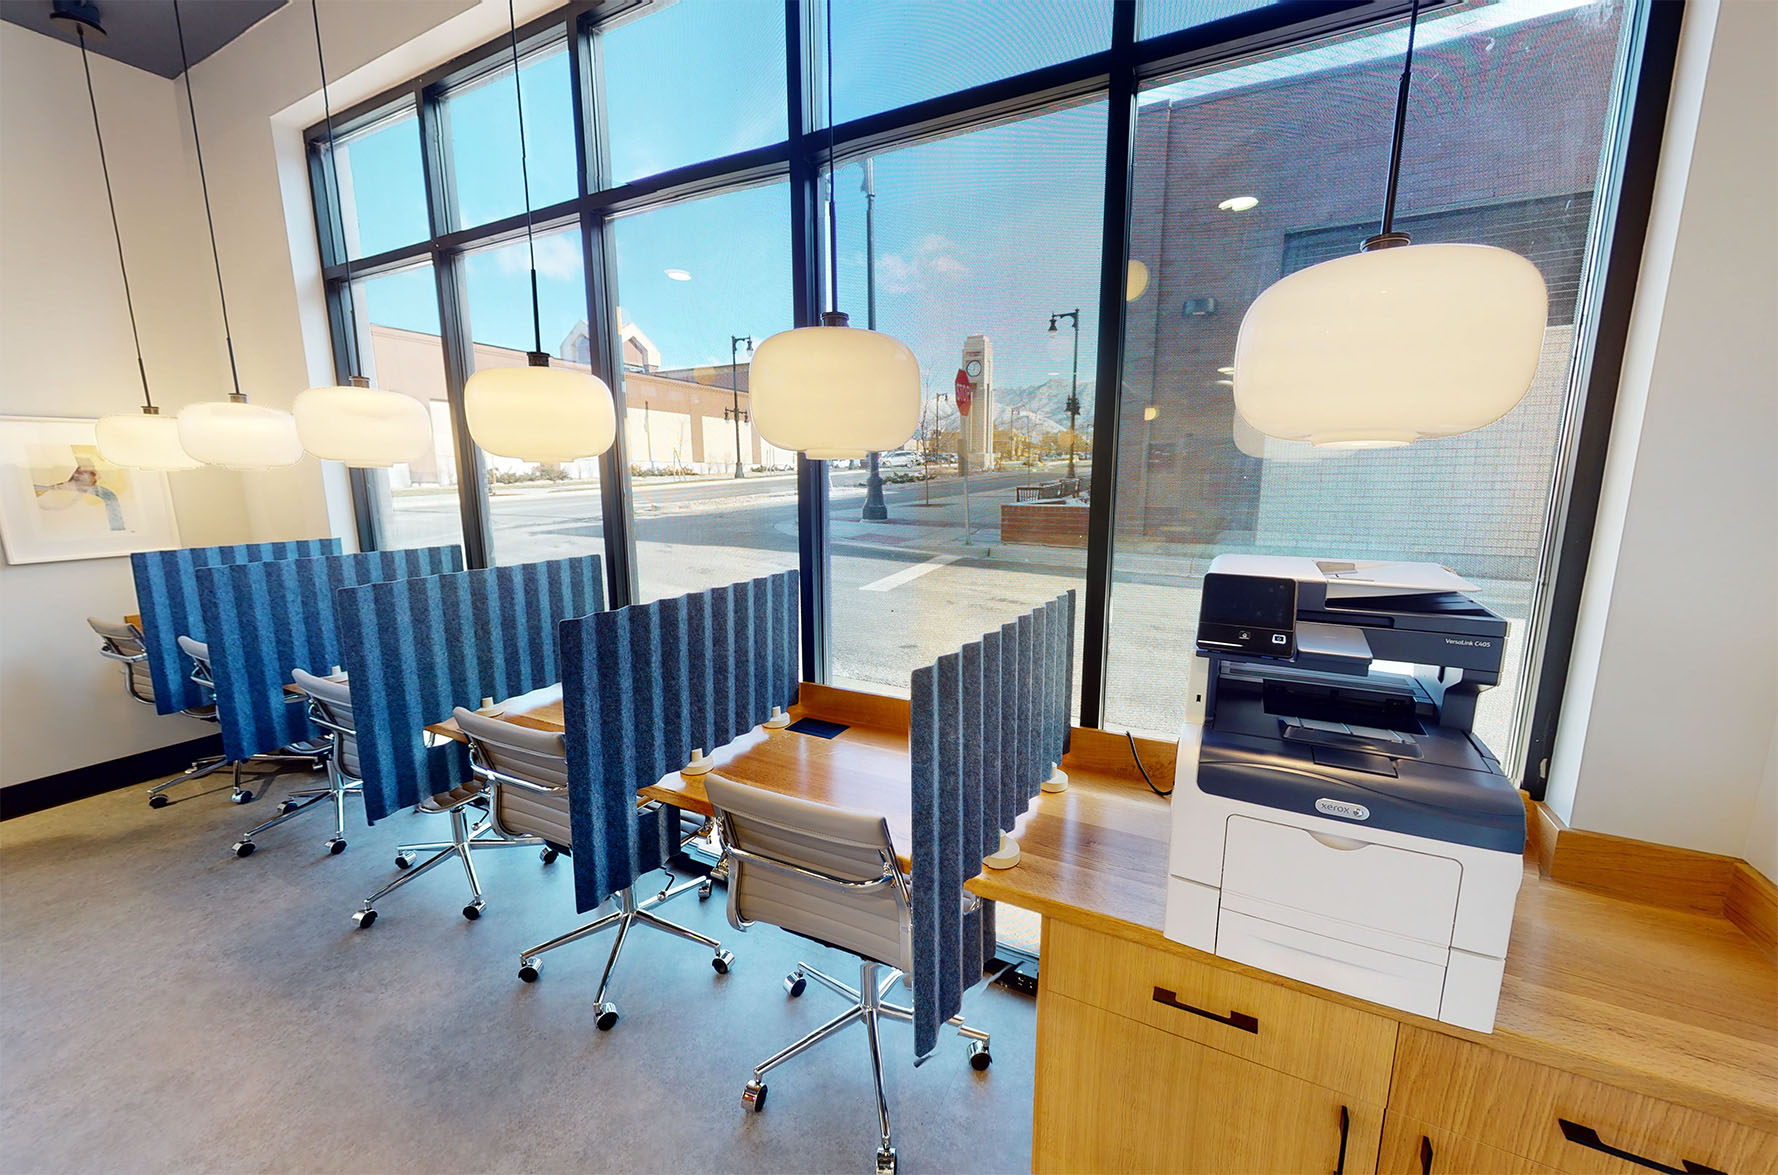 Independent workspace with  desk dividers for privacy